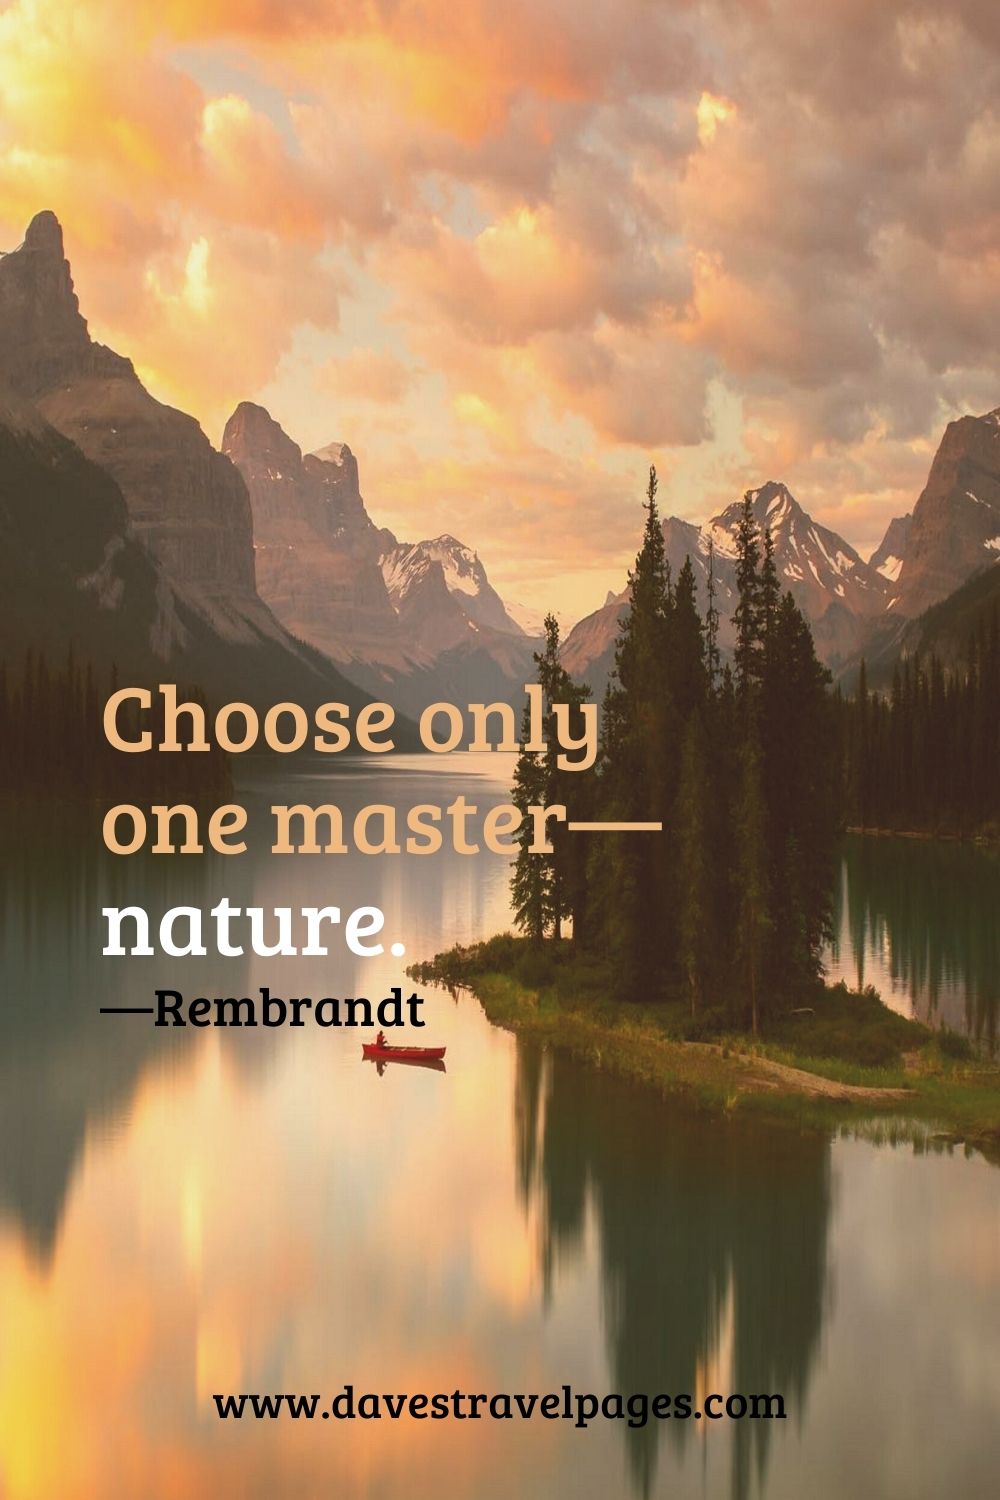 Choose only one master—nature.